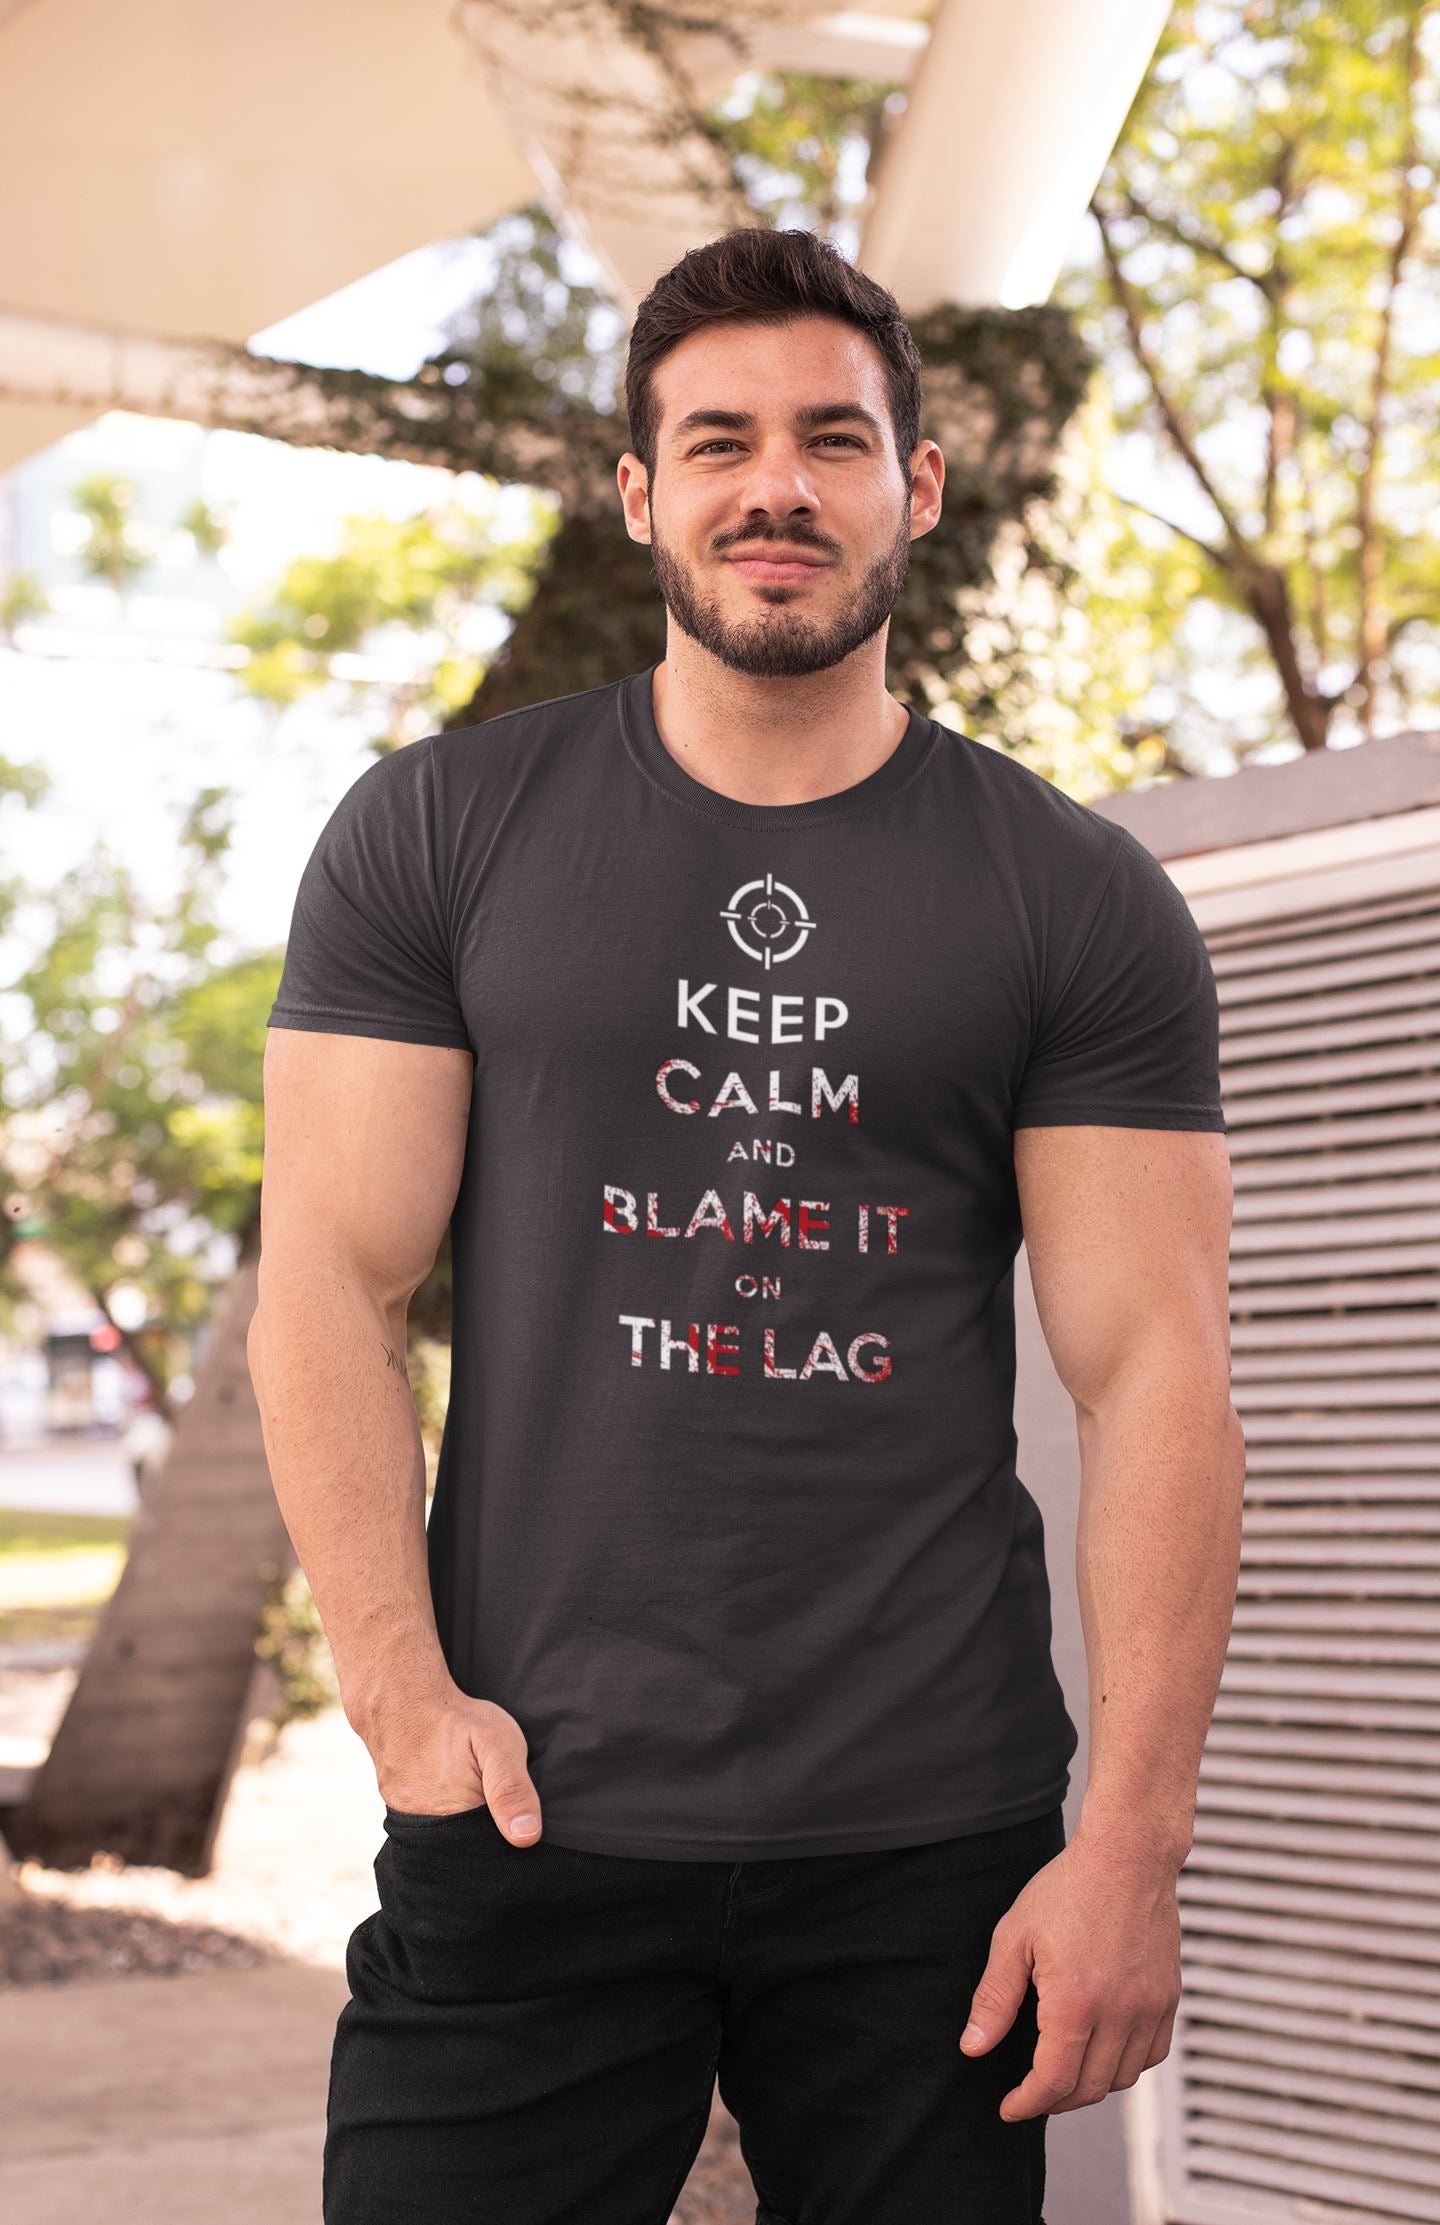 Keep Calm and Blame it on the Lag Exclusive Gaming T Shirt for Men and Women freeshipping - Catch My Drift India